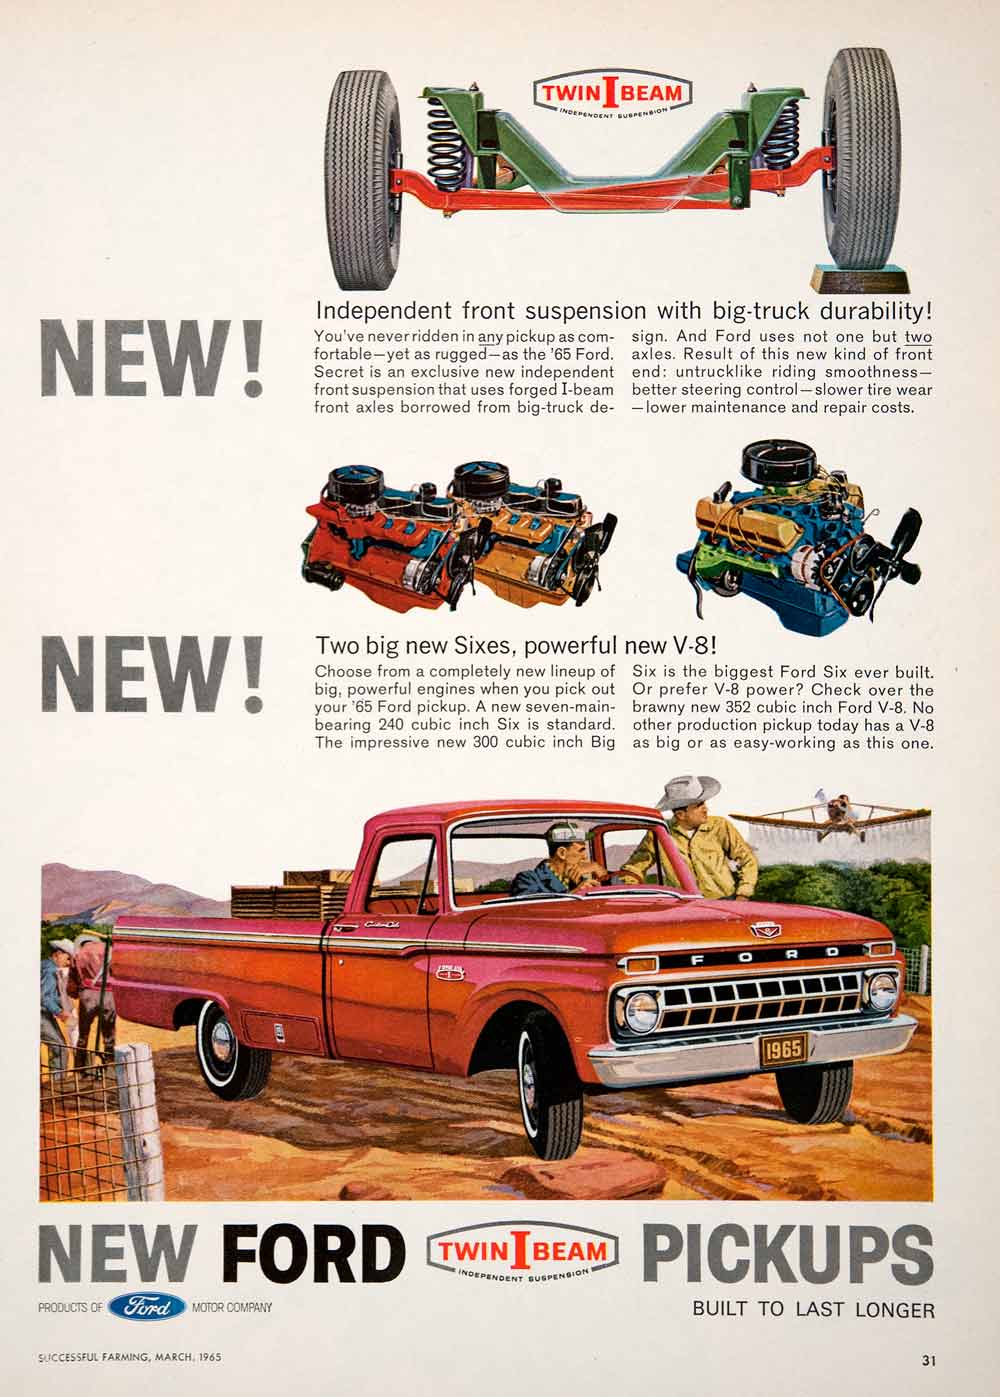 1965 Ad Ford Twin-I-Beam Pickup Truck Independent Suspension Aircraft Farm SF3